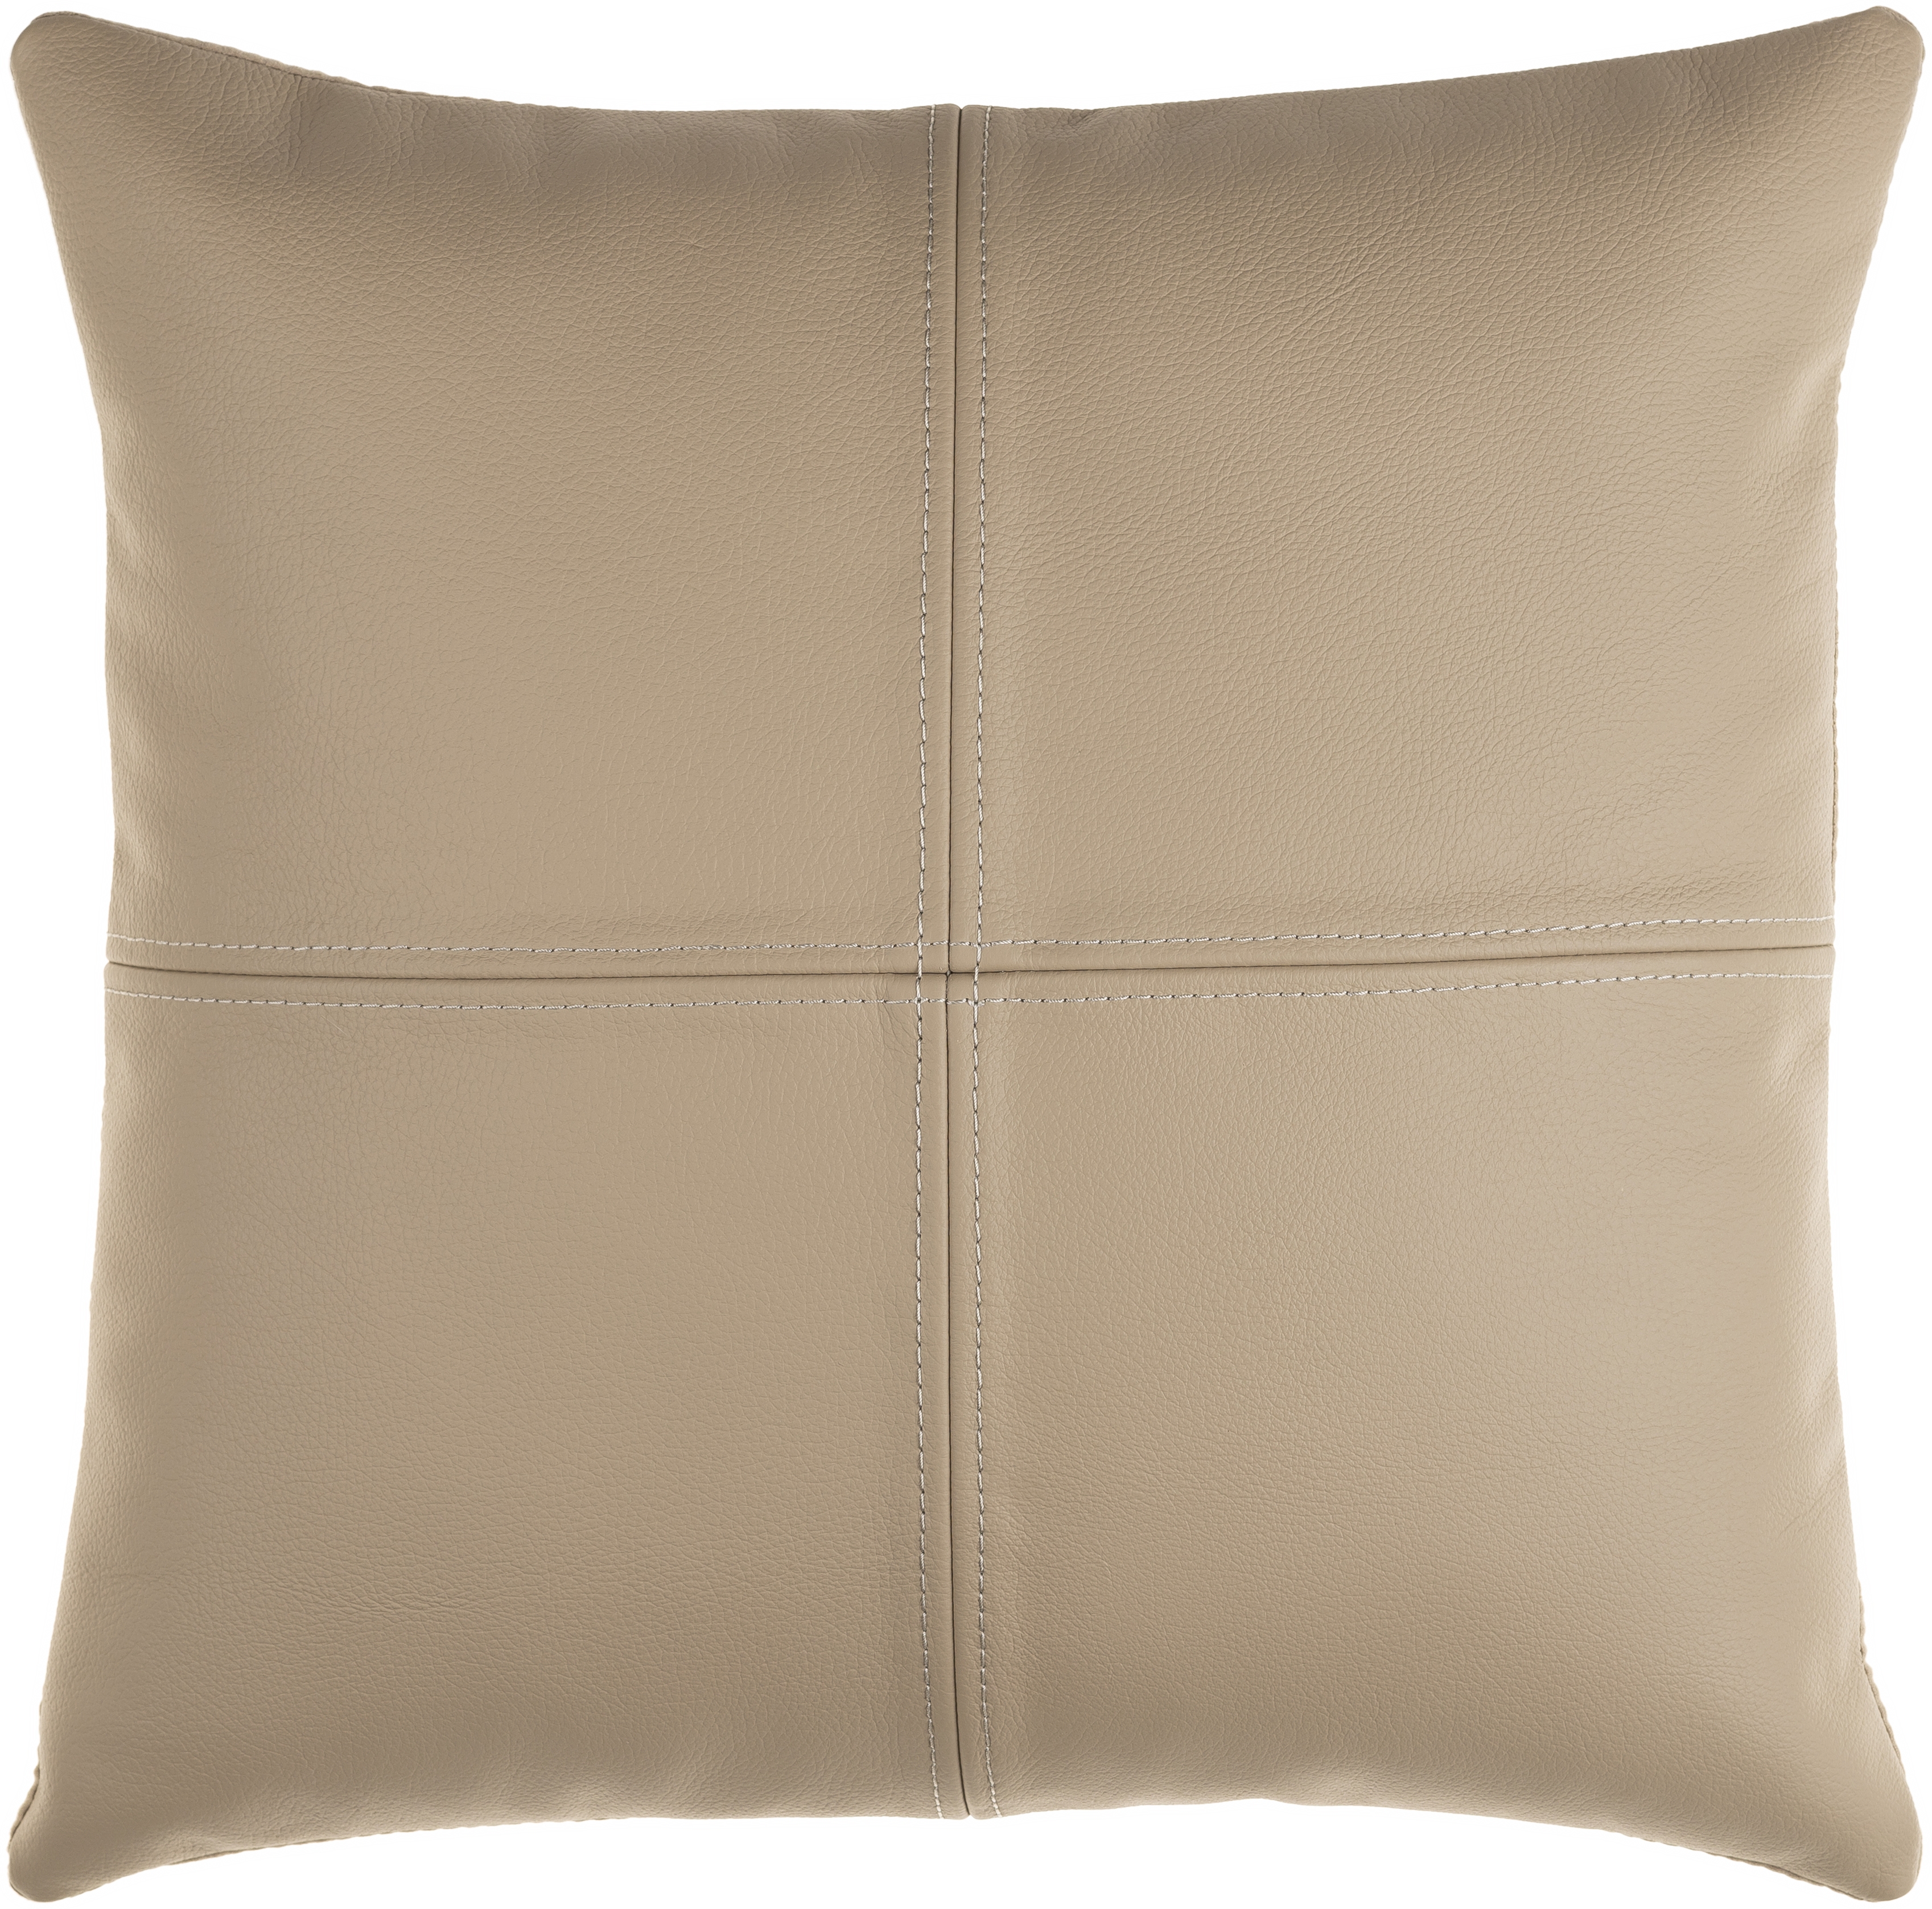 Sheffield Throw Pillow, 20" x 20", with down insert - Image 0